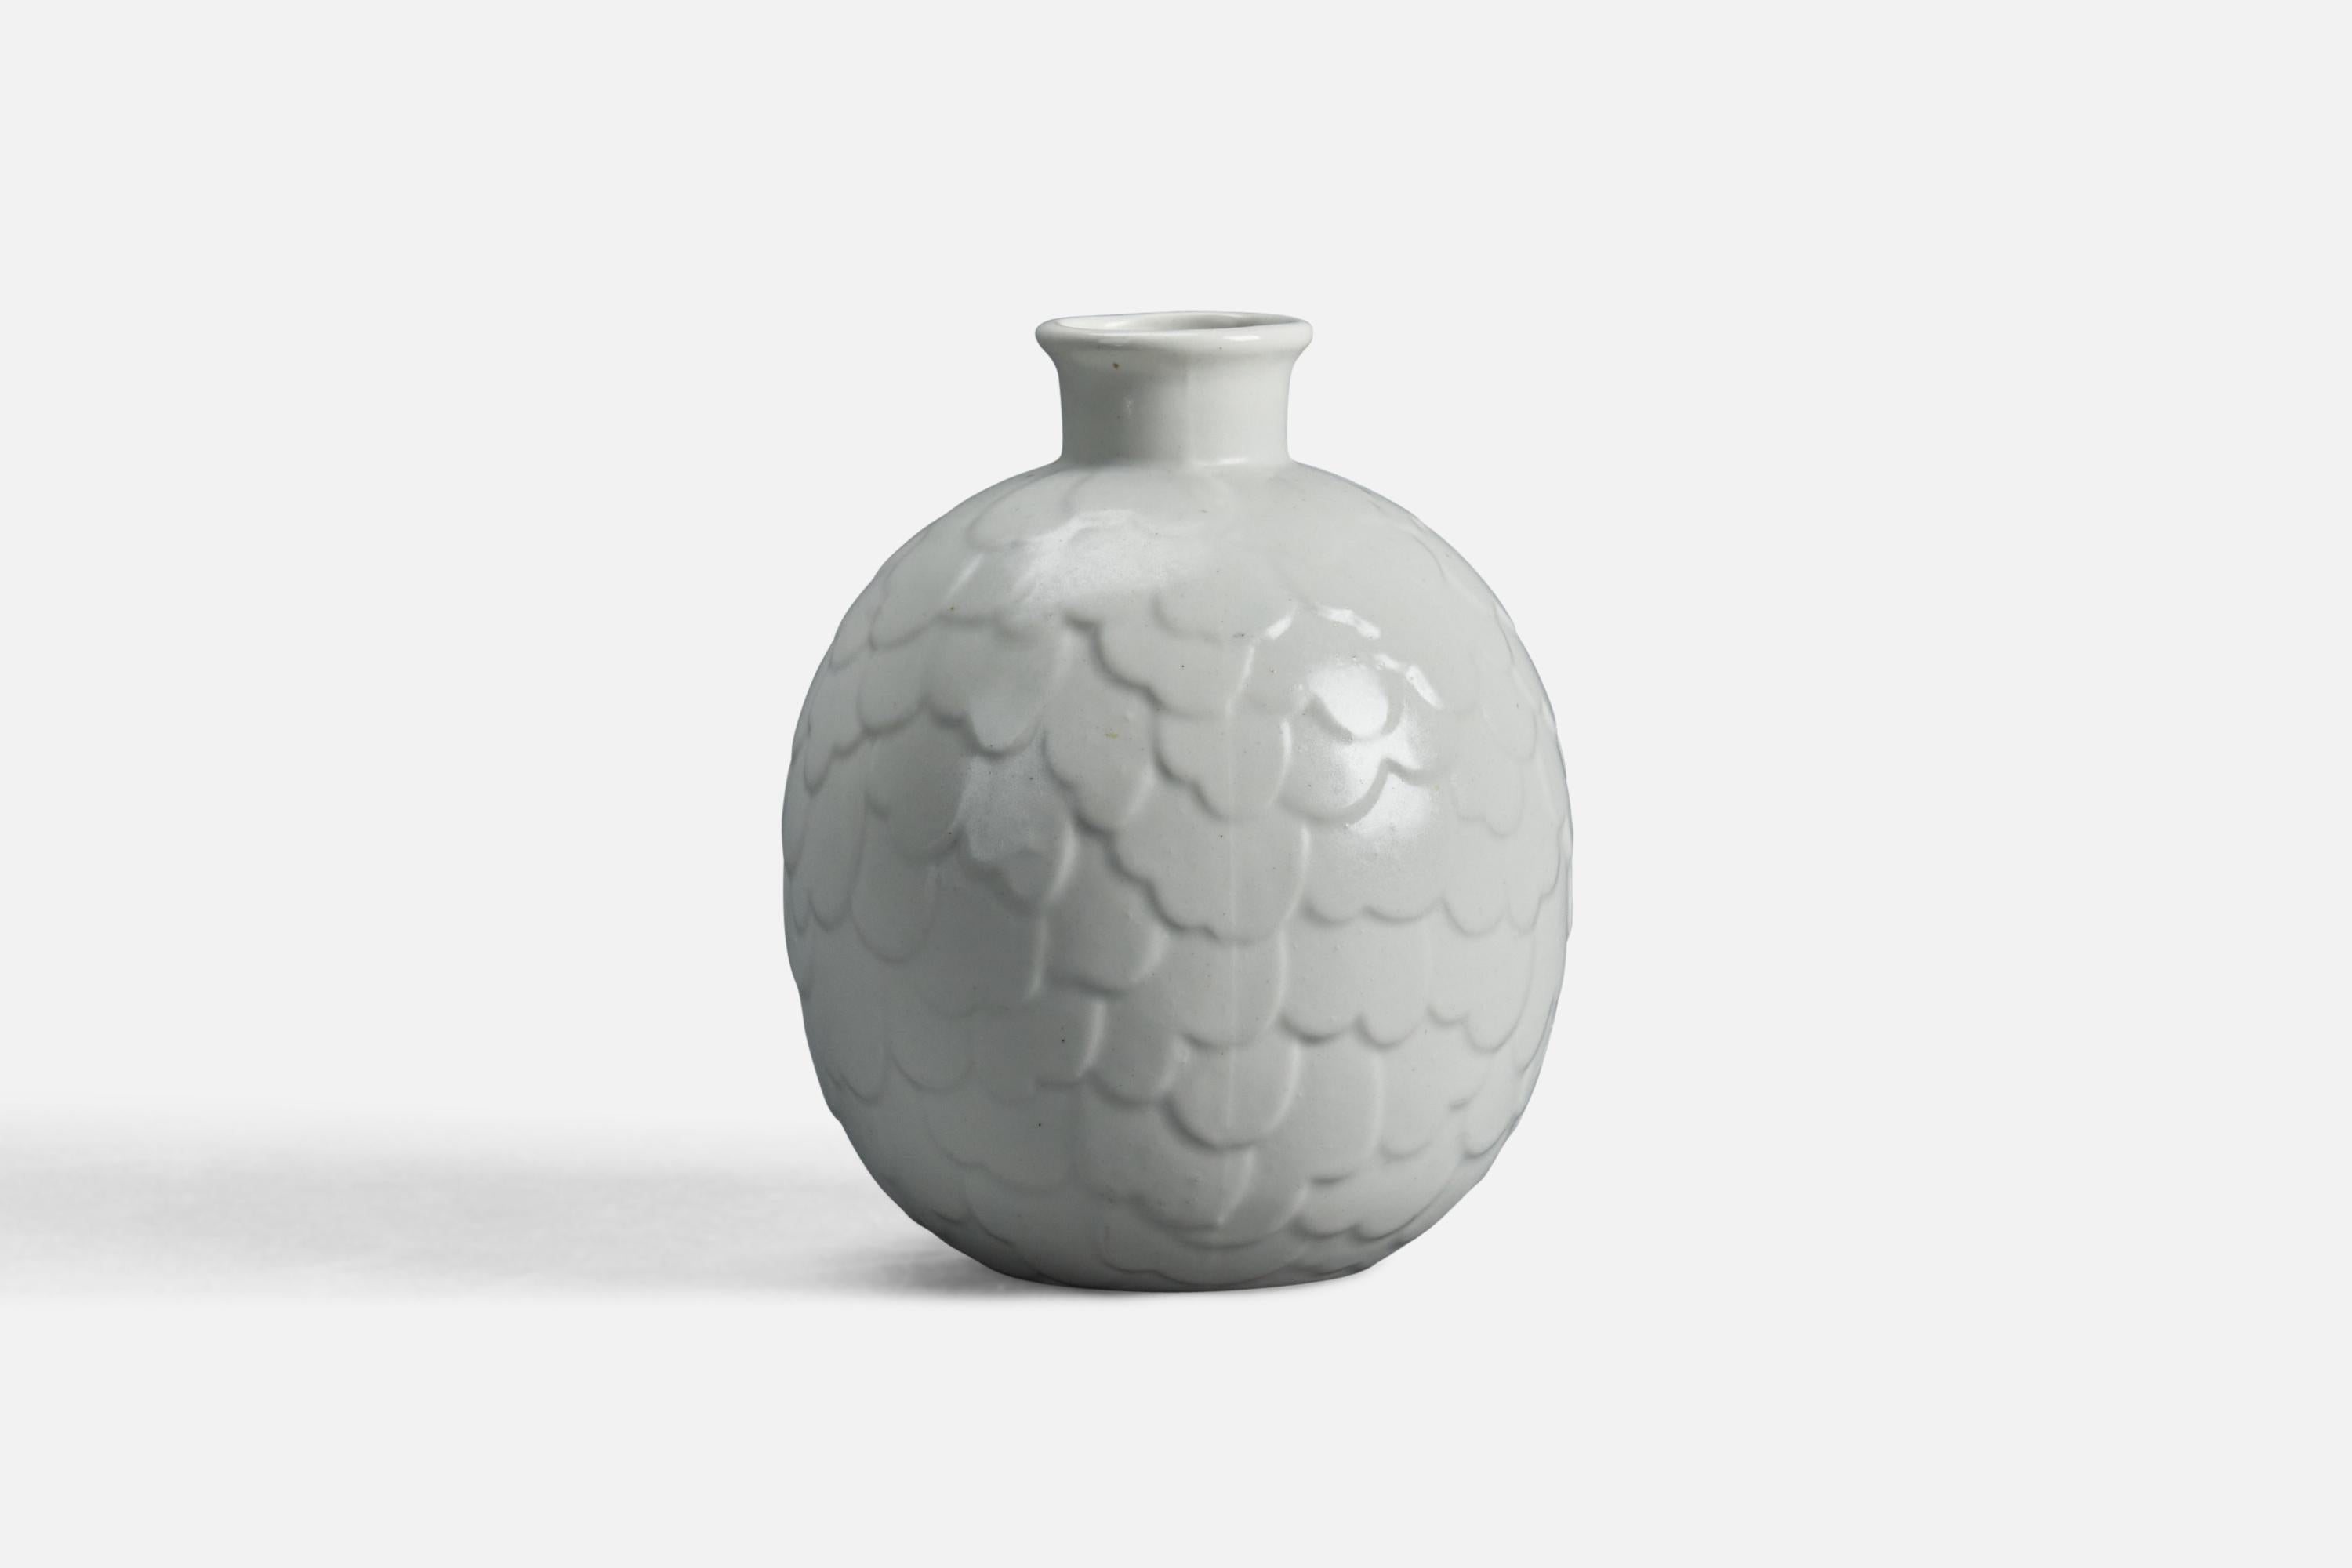 A white-glazed stoneware vase designed by Getrud Lönegren and produced by Rörstrand, Sweden, 1950s.